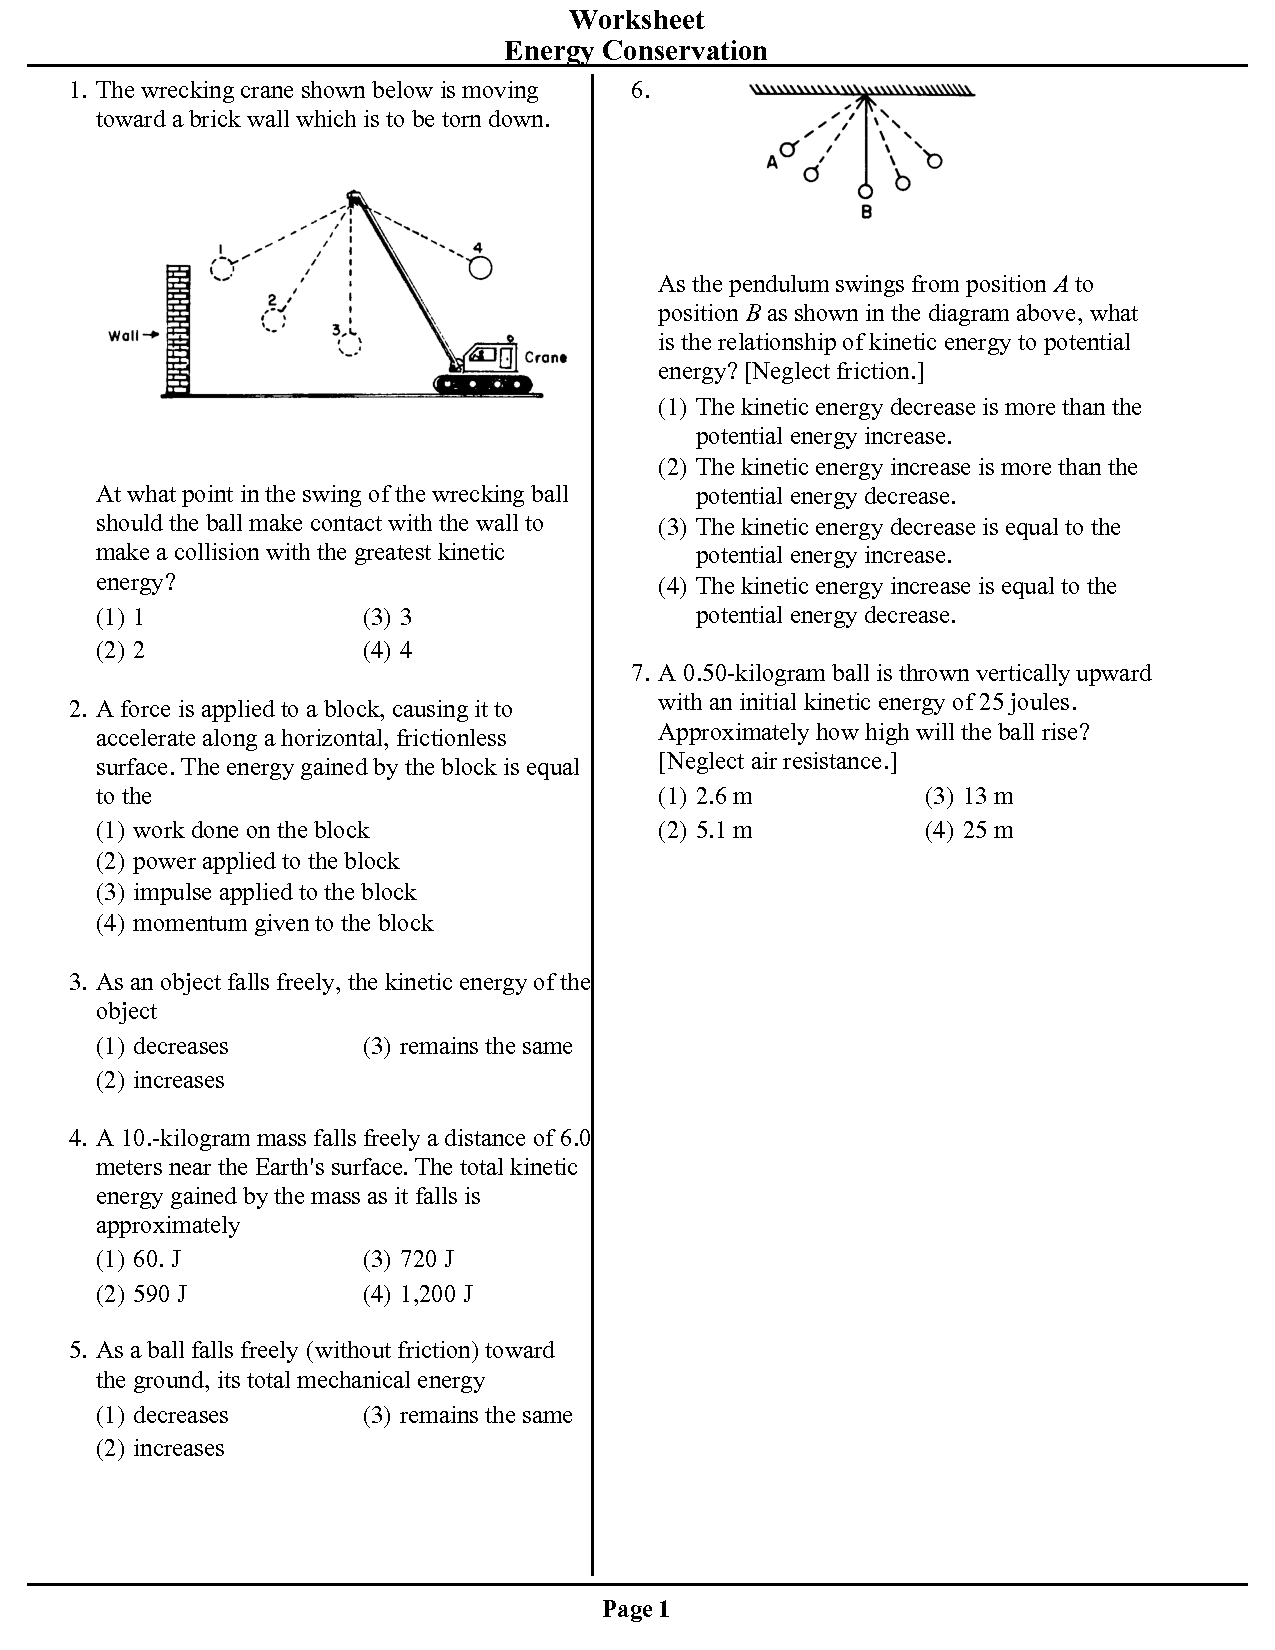 10 Best Images of Www Potential Energy Worksheets - Potential Energy